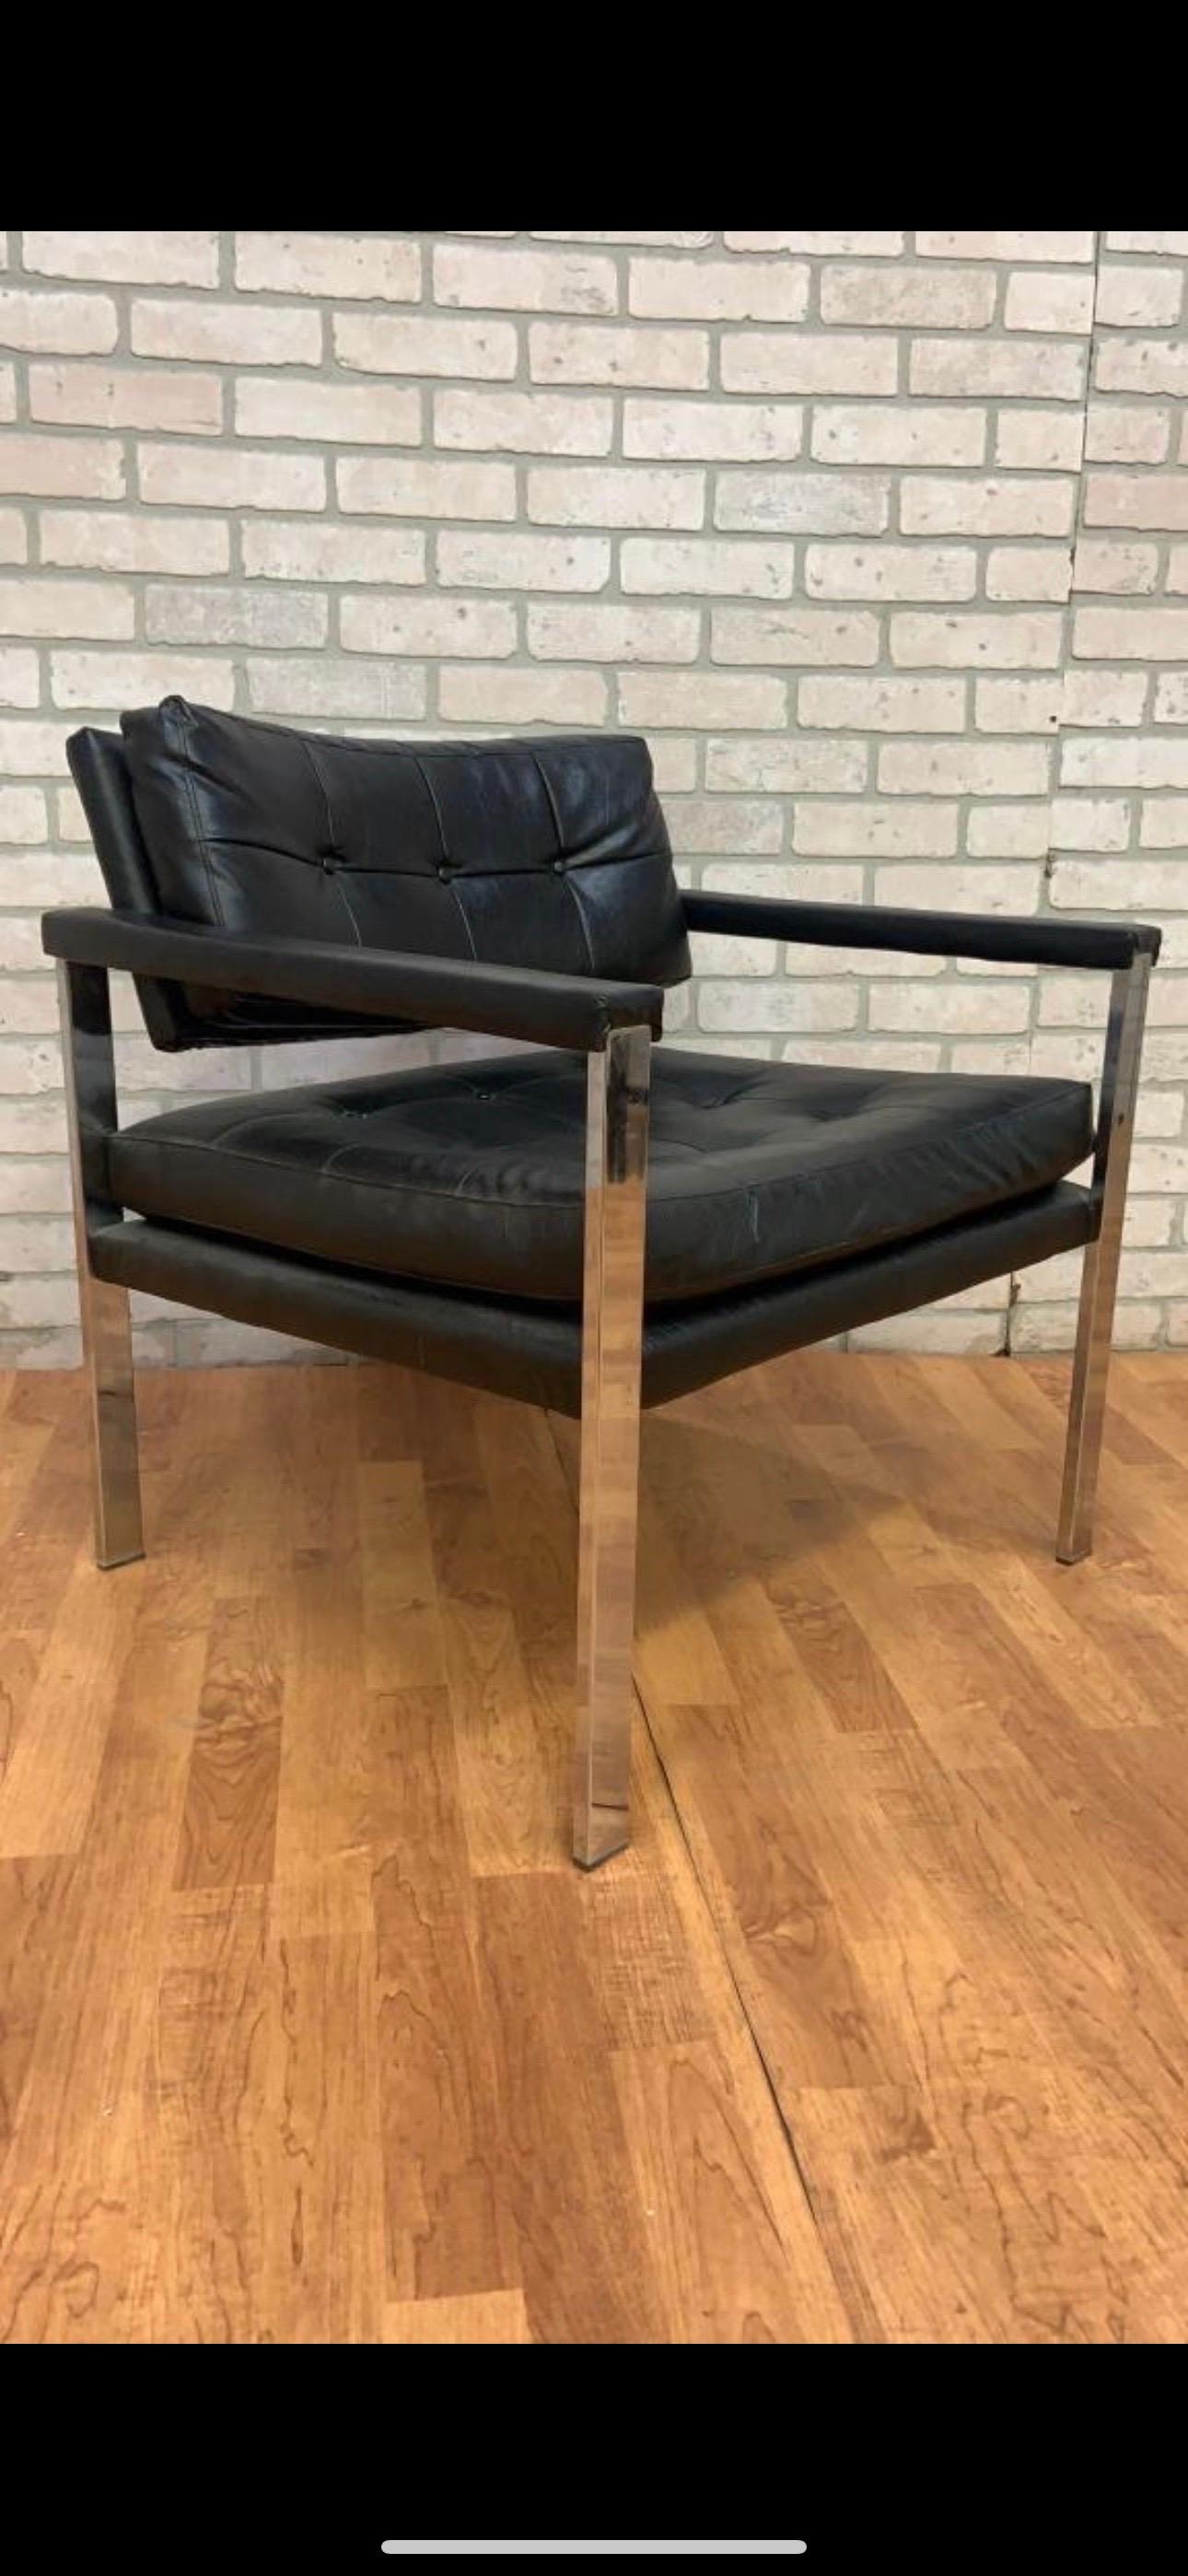 Mid-Century Modern Milo Baughman Style Chrome Flat Bar Armchair

This is a sleek Mid-Century Modern Milo Baughman Style Chrome Flat Bar Armchair that will be sure to heighten any modern, post-modern and mid-century room! This chair has been